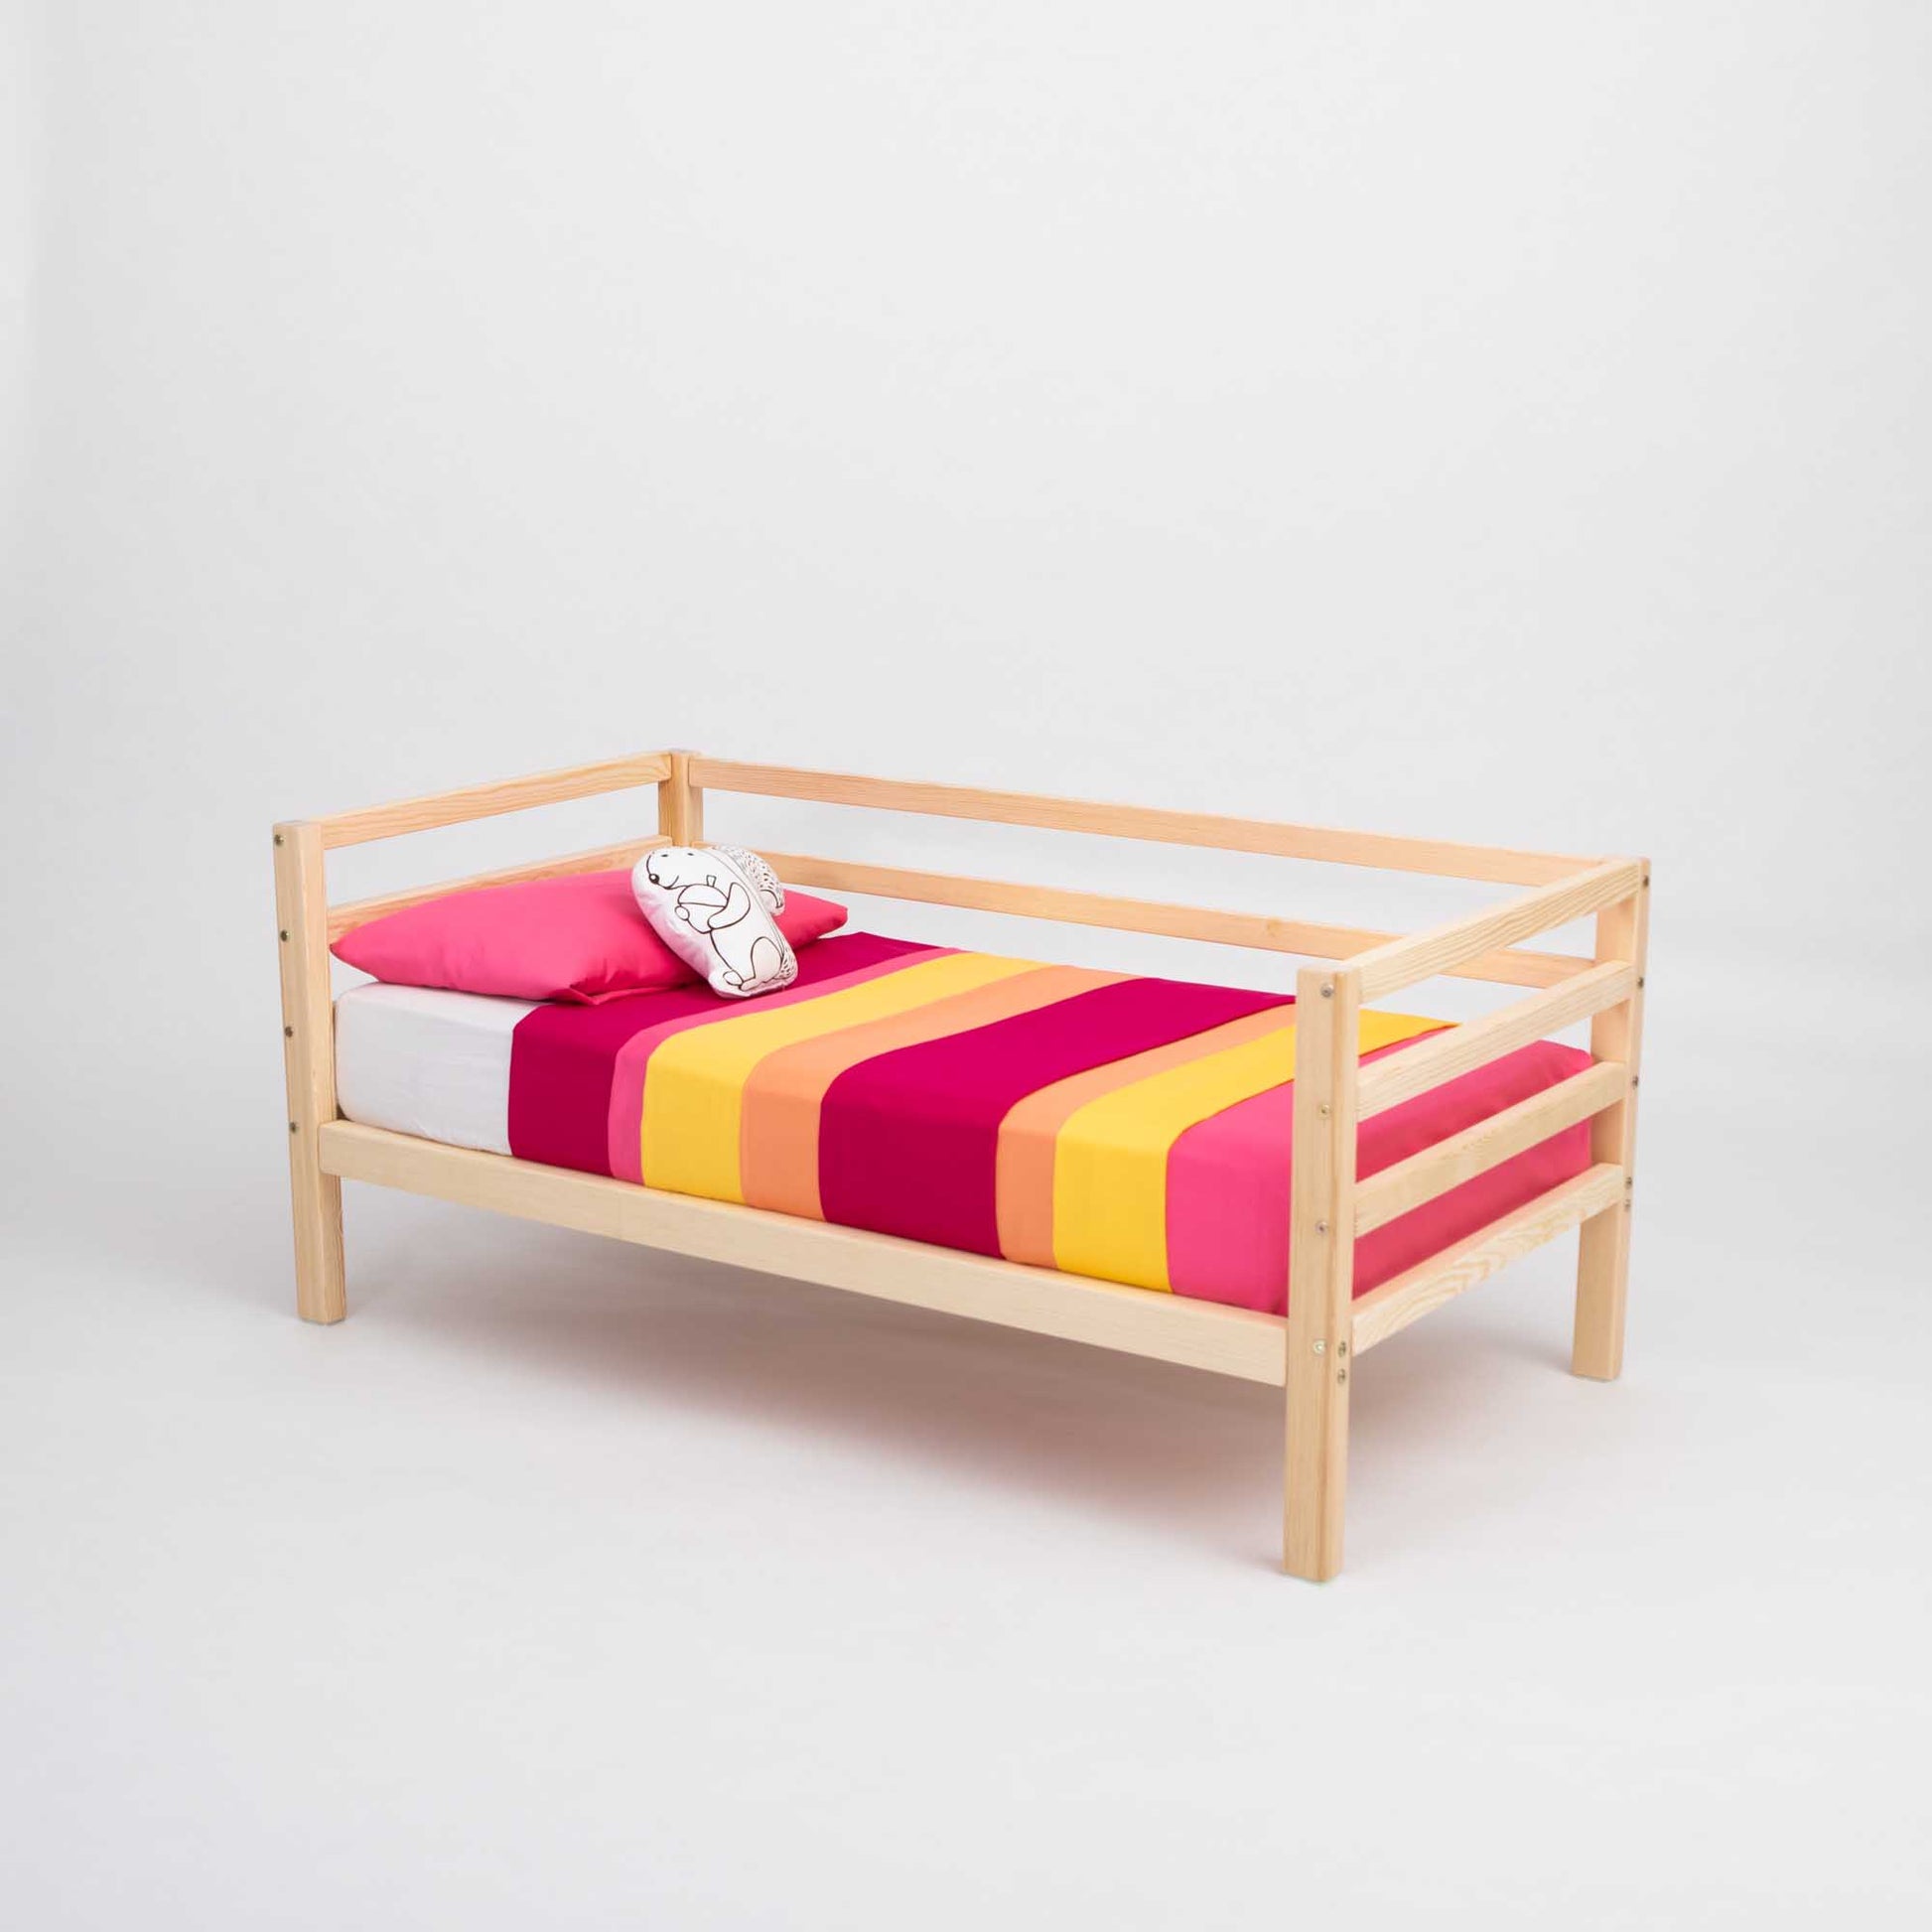 A Sweet Home From Wood Kids' bed on legs with a 3-sided horizontal rail, colorful striped toddler bed.